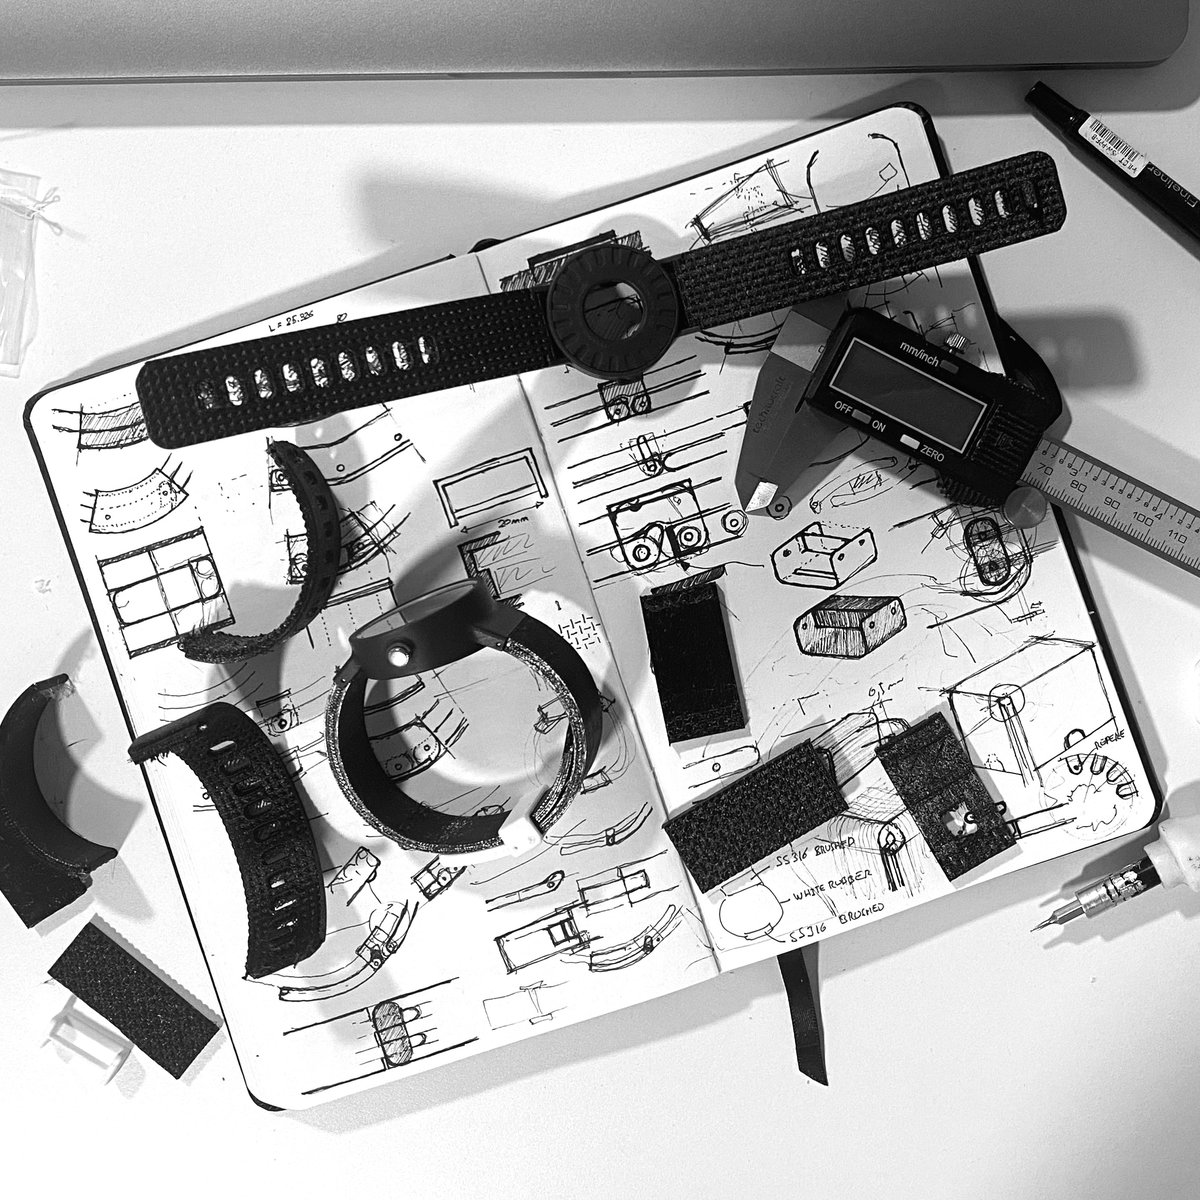 Want to see how it all began? Check out this behind-the-scenes snapshot of the first prototype taking shape. 

#prototype #watch #IndustrialDesign #WatchDesign #3DPrinting #Prototypes #Sketches #WatchPrototype #3DPrinted #DesignDrawings #PrototypeDesign #DesignSketches